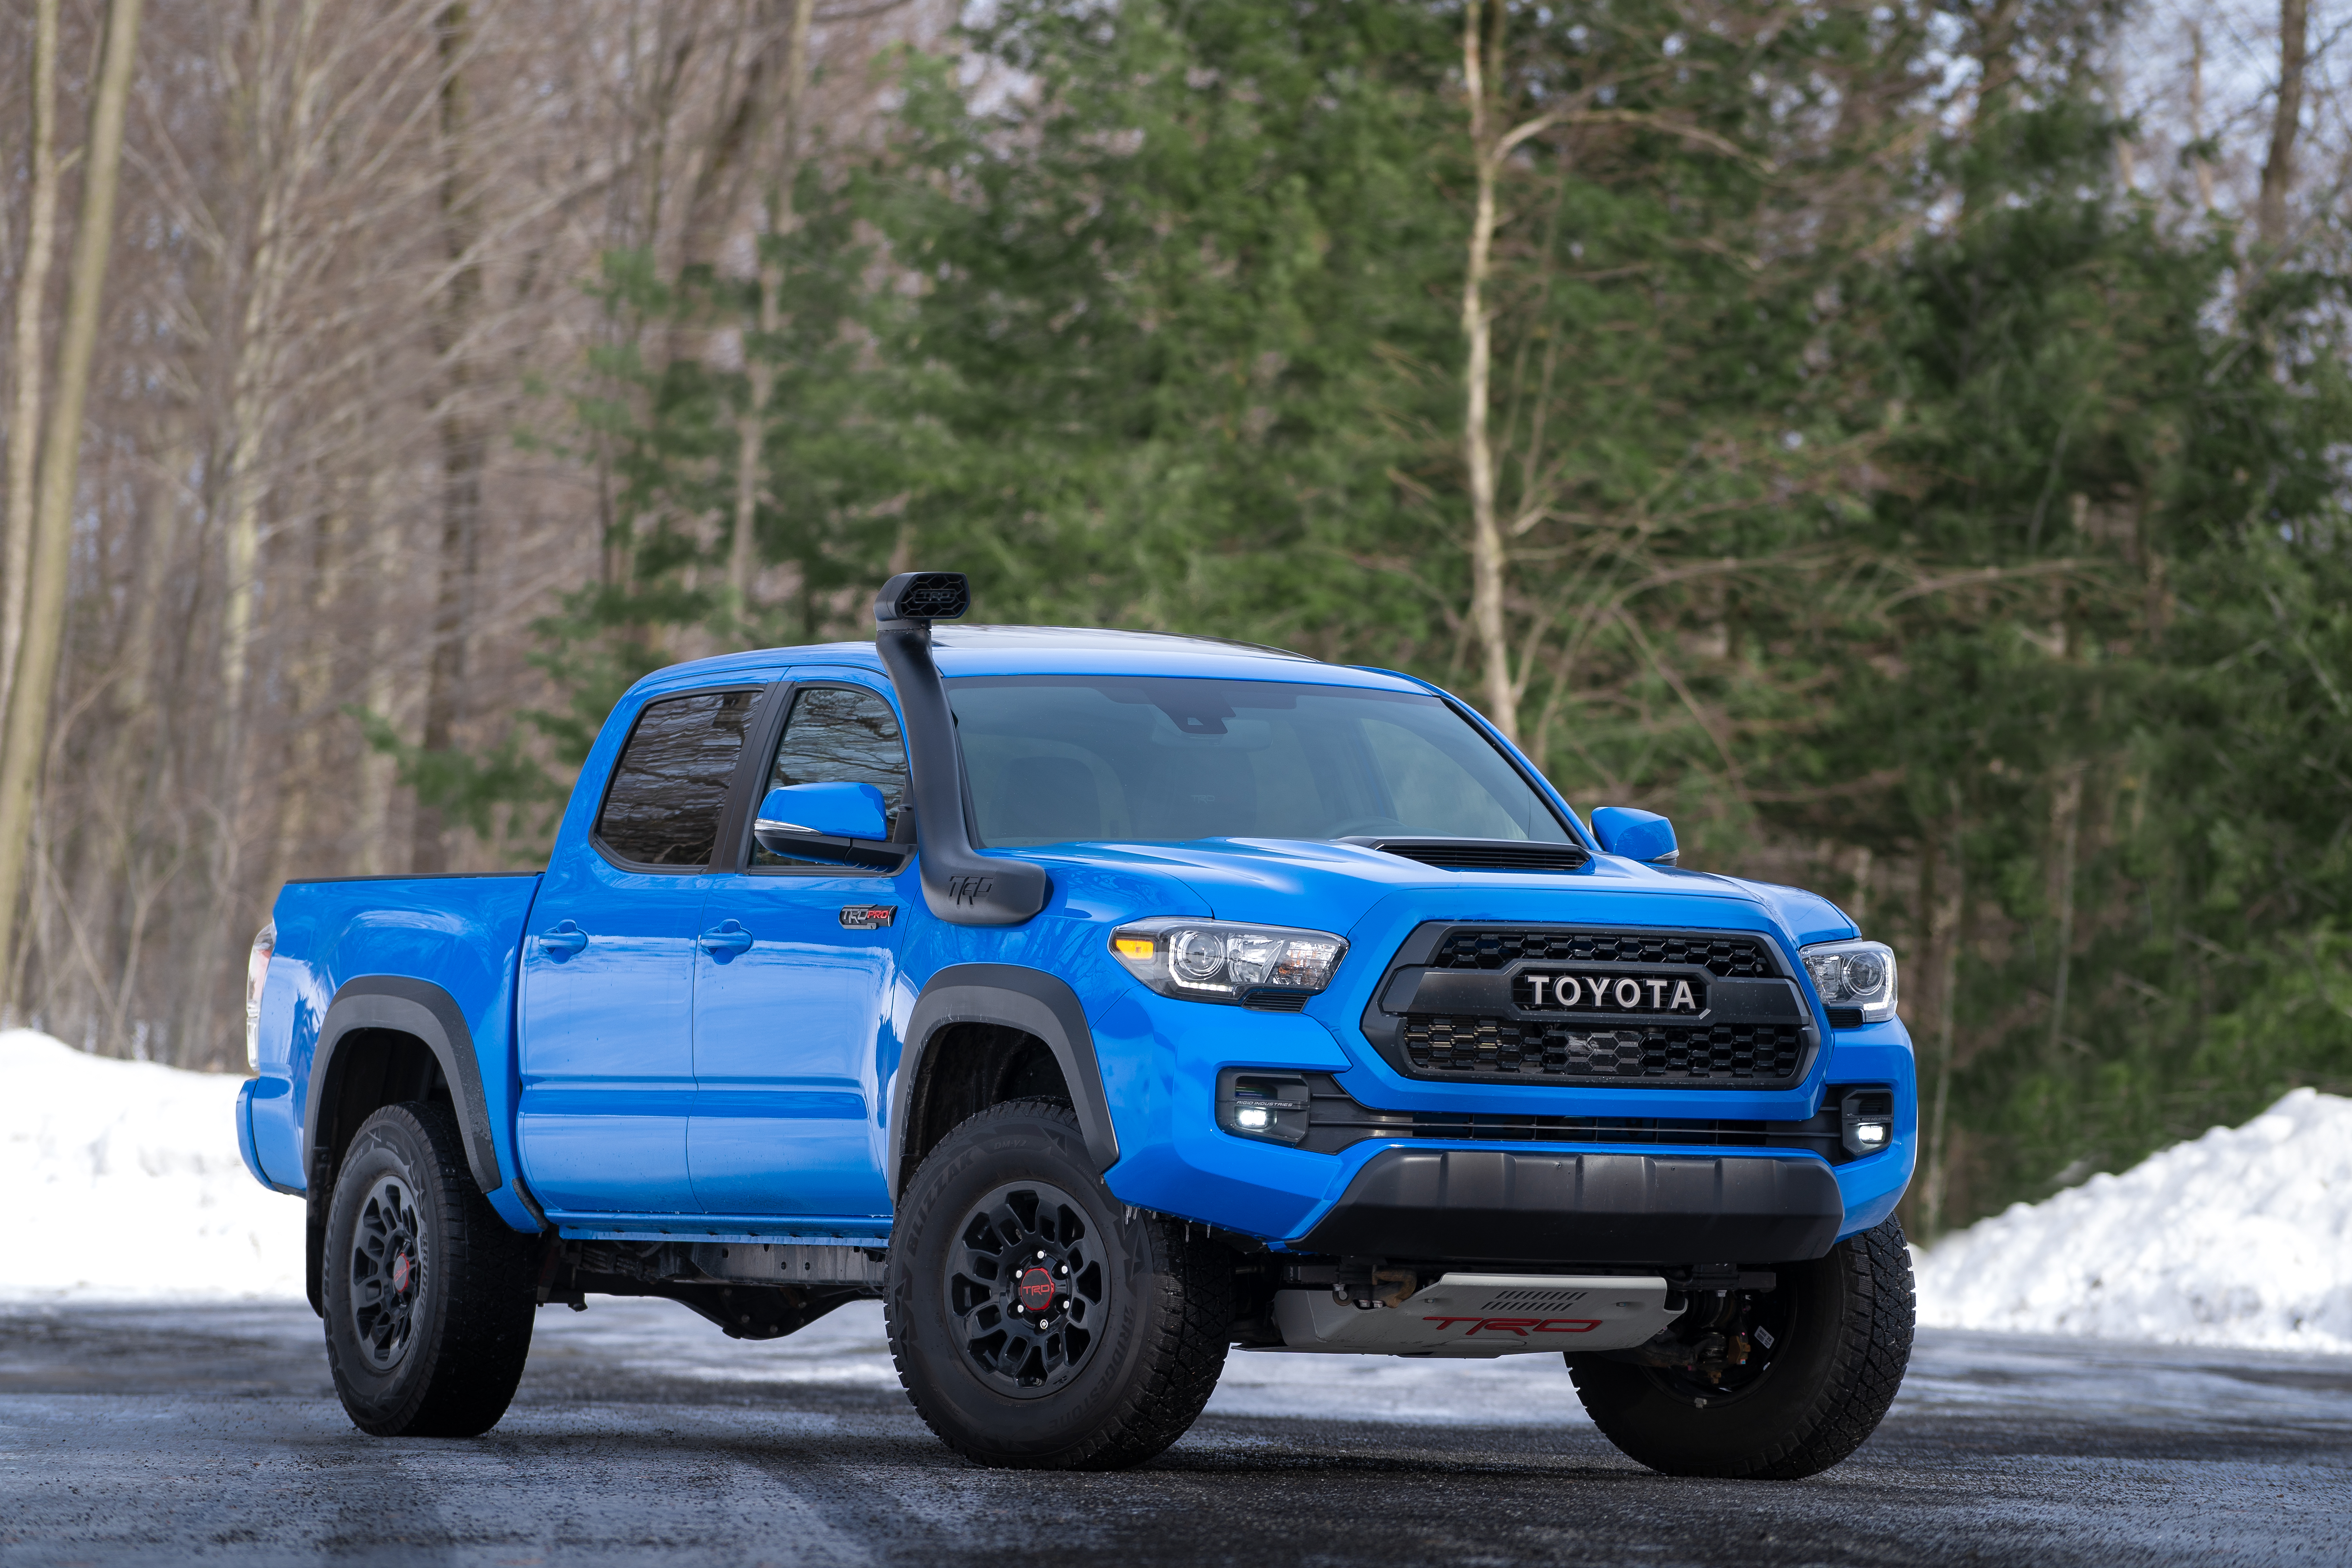 The 2019 Toyota Tacoma TRD Pro Isn't New, But It's Still Cool As Hell